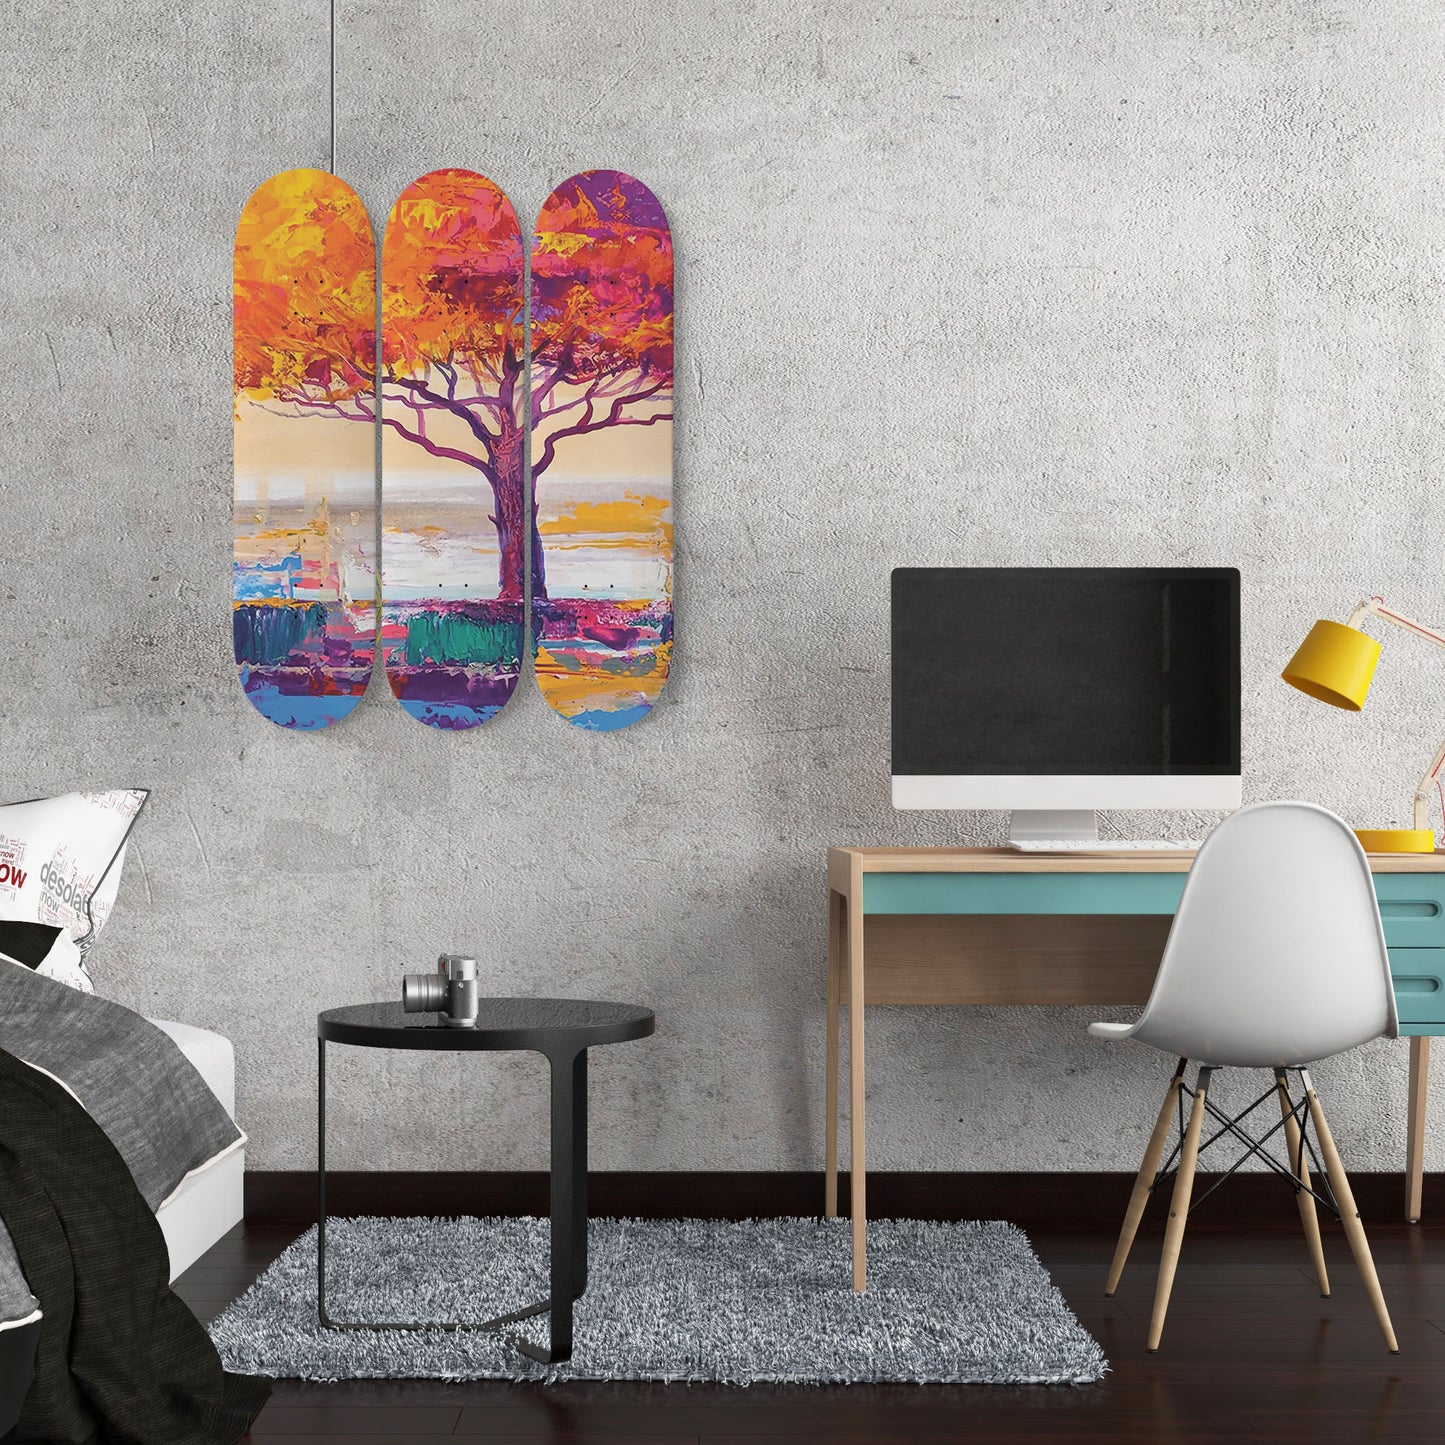 Random Colorful Artwork 12 | Skateboard Deck Wall Art, Wall Hanged Room Decoration, Maple Wood, Accent Gift for Home, Aesthetic Wall Art